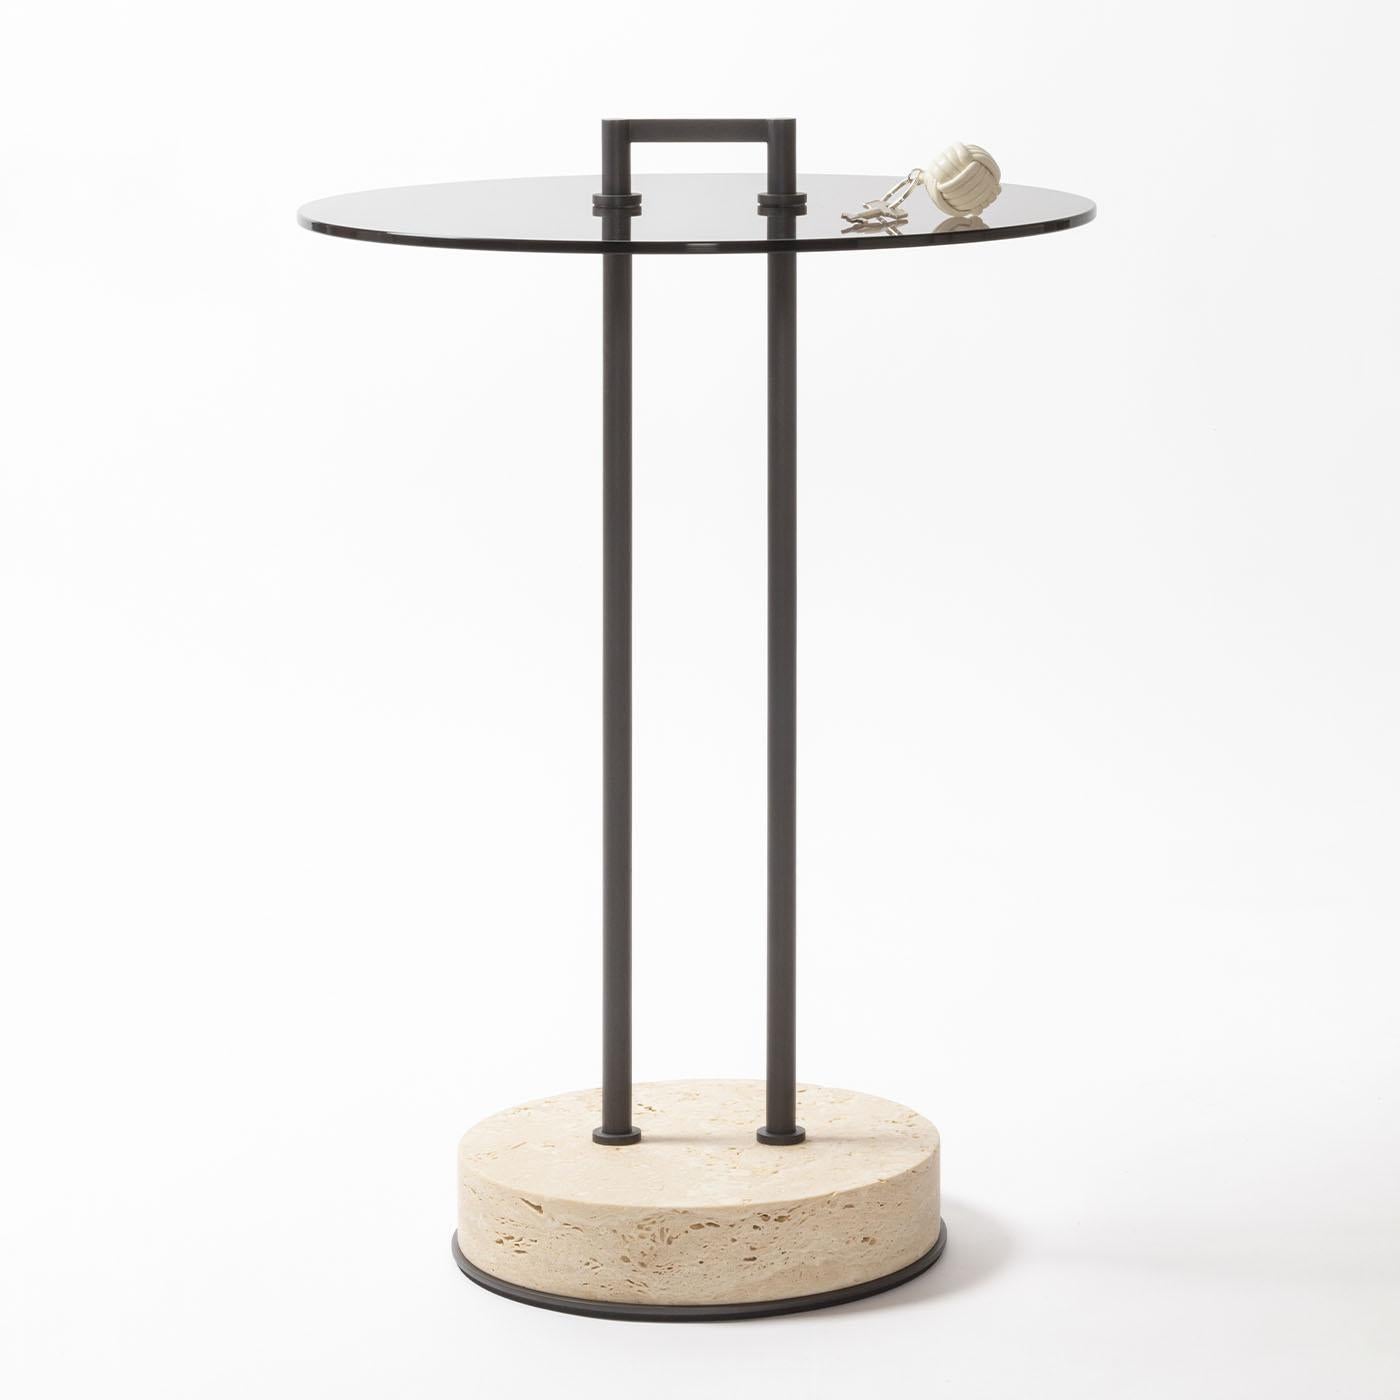 Metal structure available in three different finishes featuring a fine marble base and a glass top which can be either transparent or dark bronze-colored. This slim, elegantly functional occasional table is the ideal solution to enhance any corner